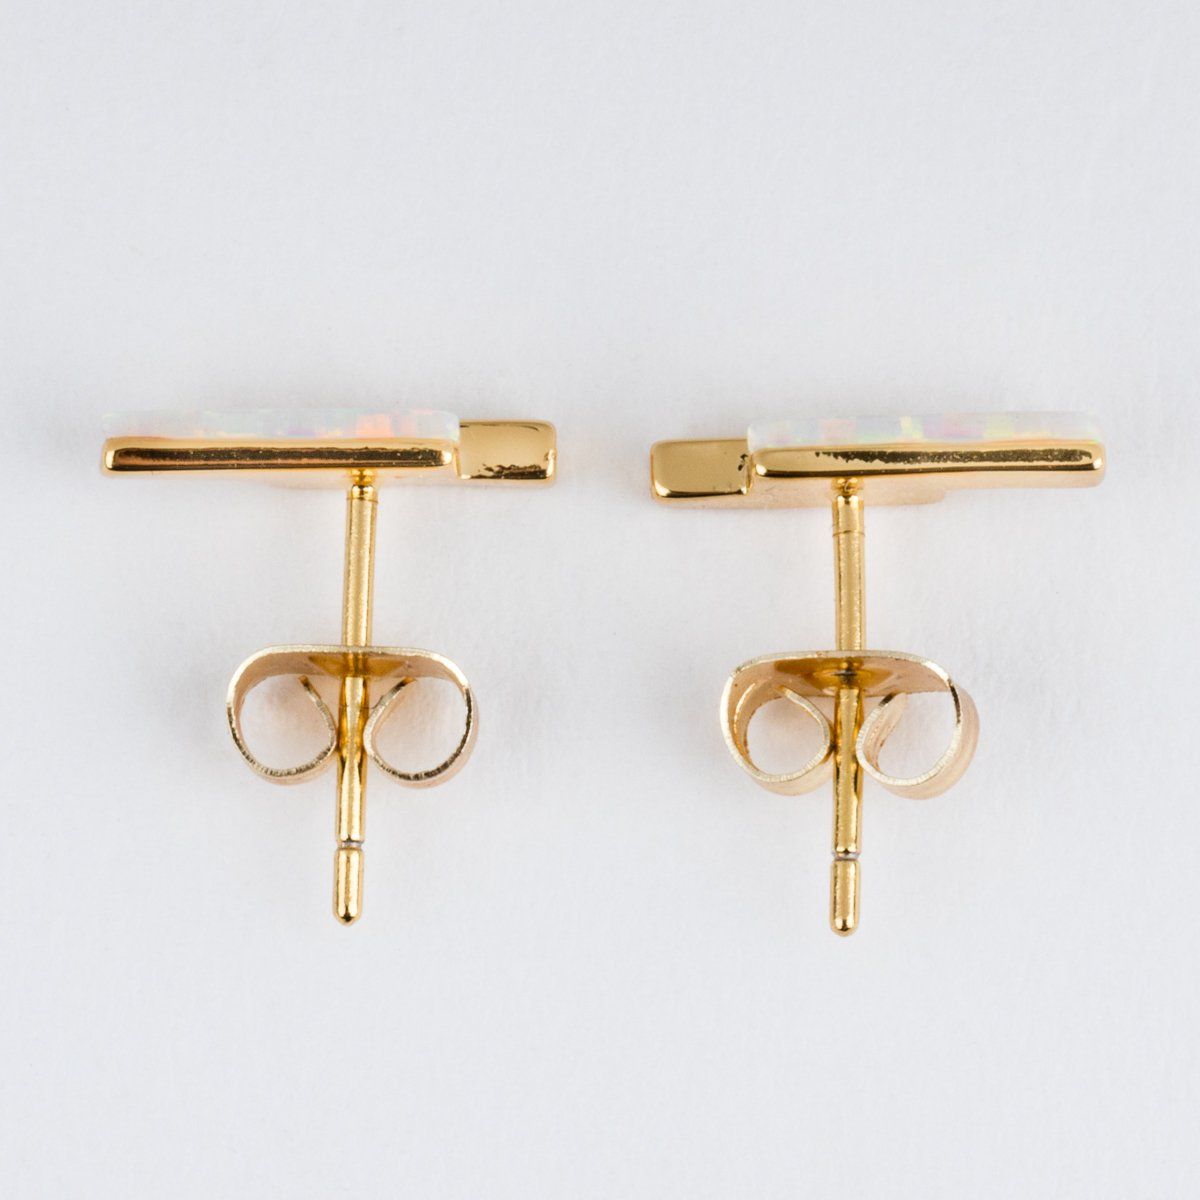 Local Eclectic Gold Mod Bar Gem Stud Earrings with Opal 